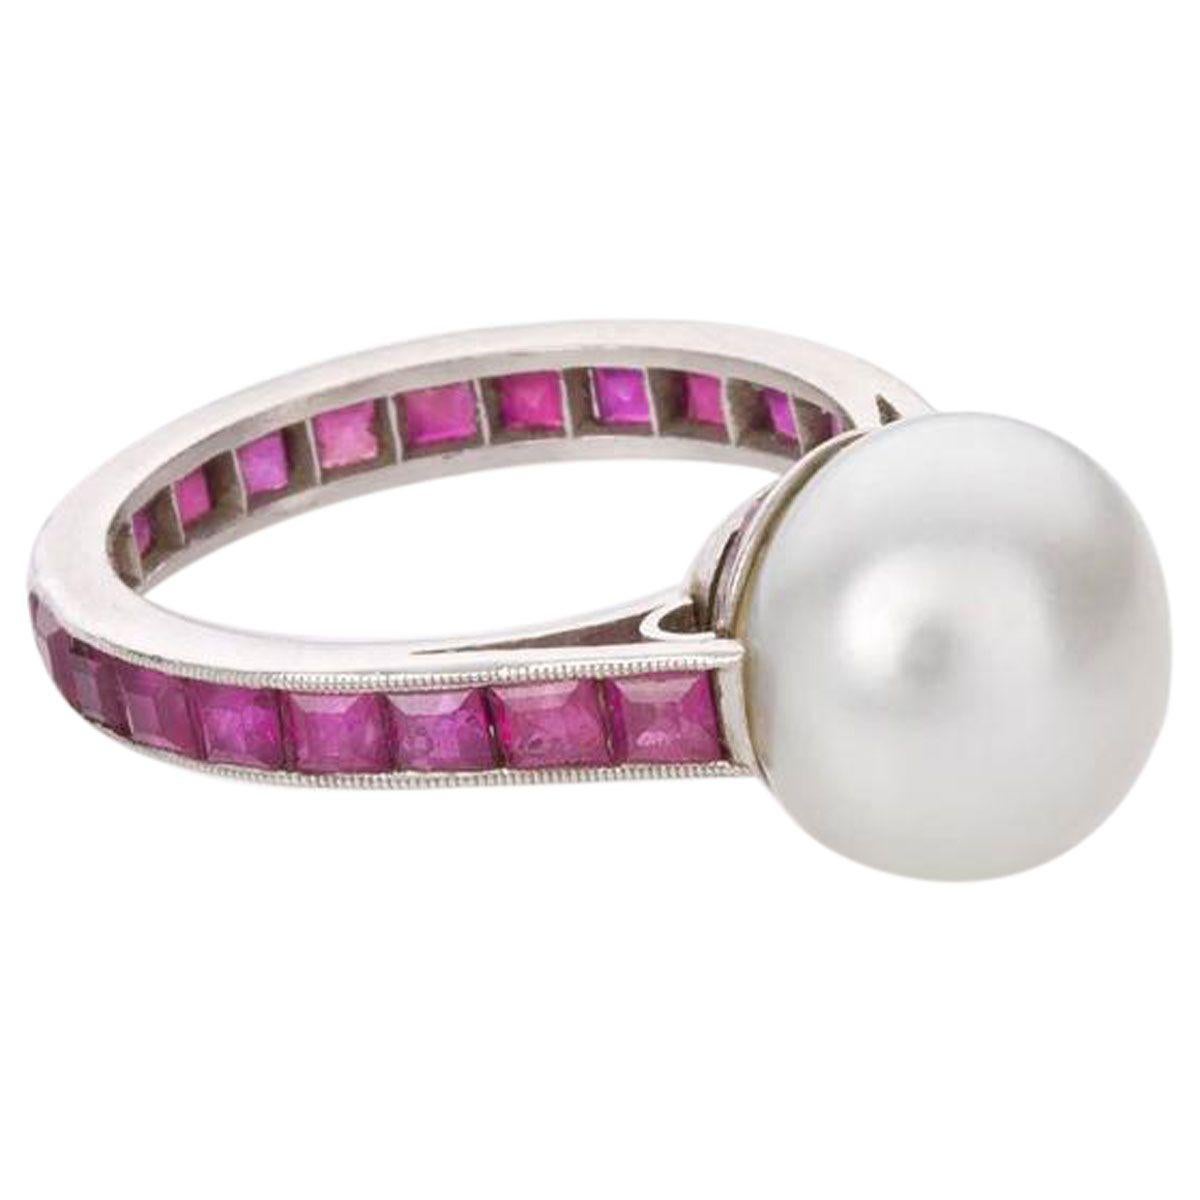 This unique estate Australian South Sea Pearl and Ruby dress ring is such a fabulous piece, so eye-catching and unusual. Featuring at the centre one 10 - 10.5mm button shape South Sea pearl with silver overtones and a bright lustre. The platinum